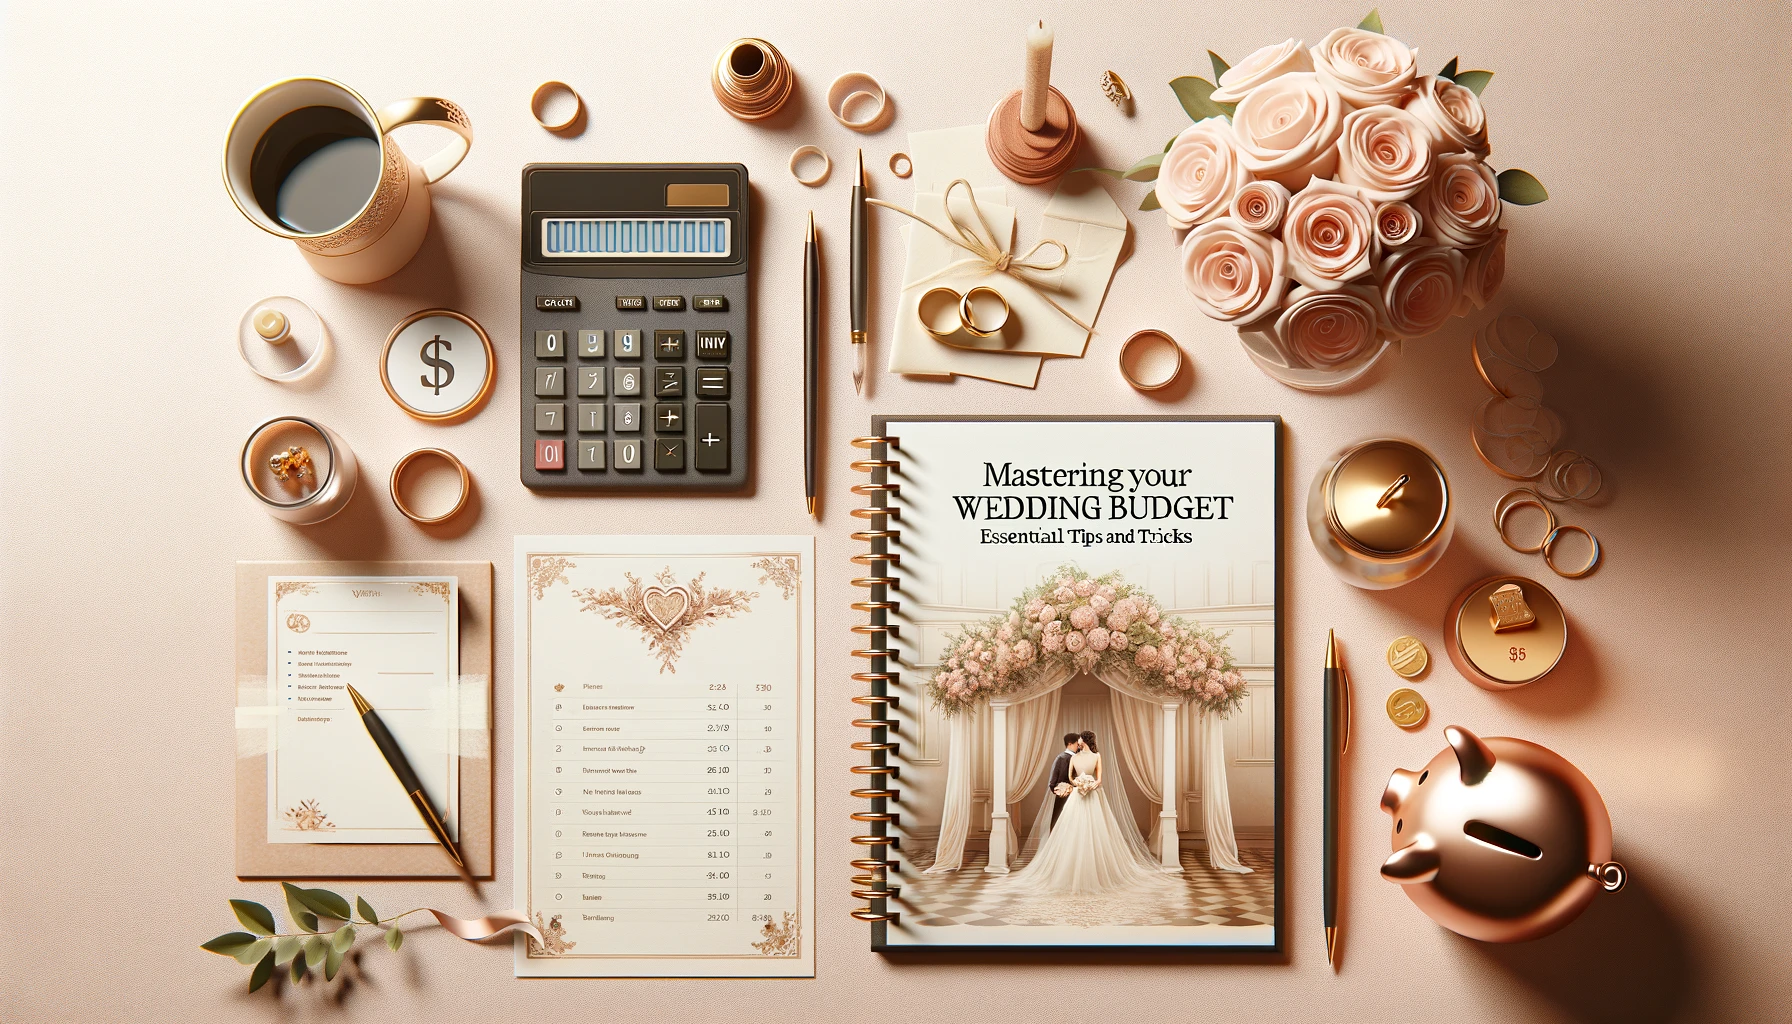 Mastering Your Wedding Budget: Essential Tips and Tricks